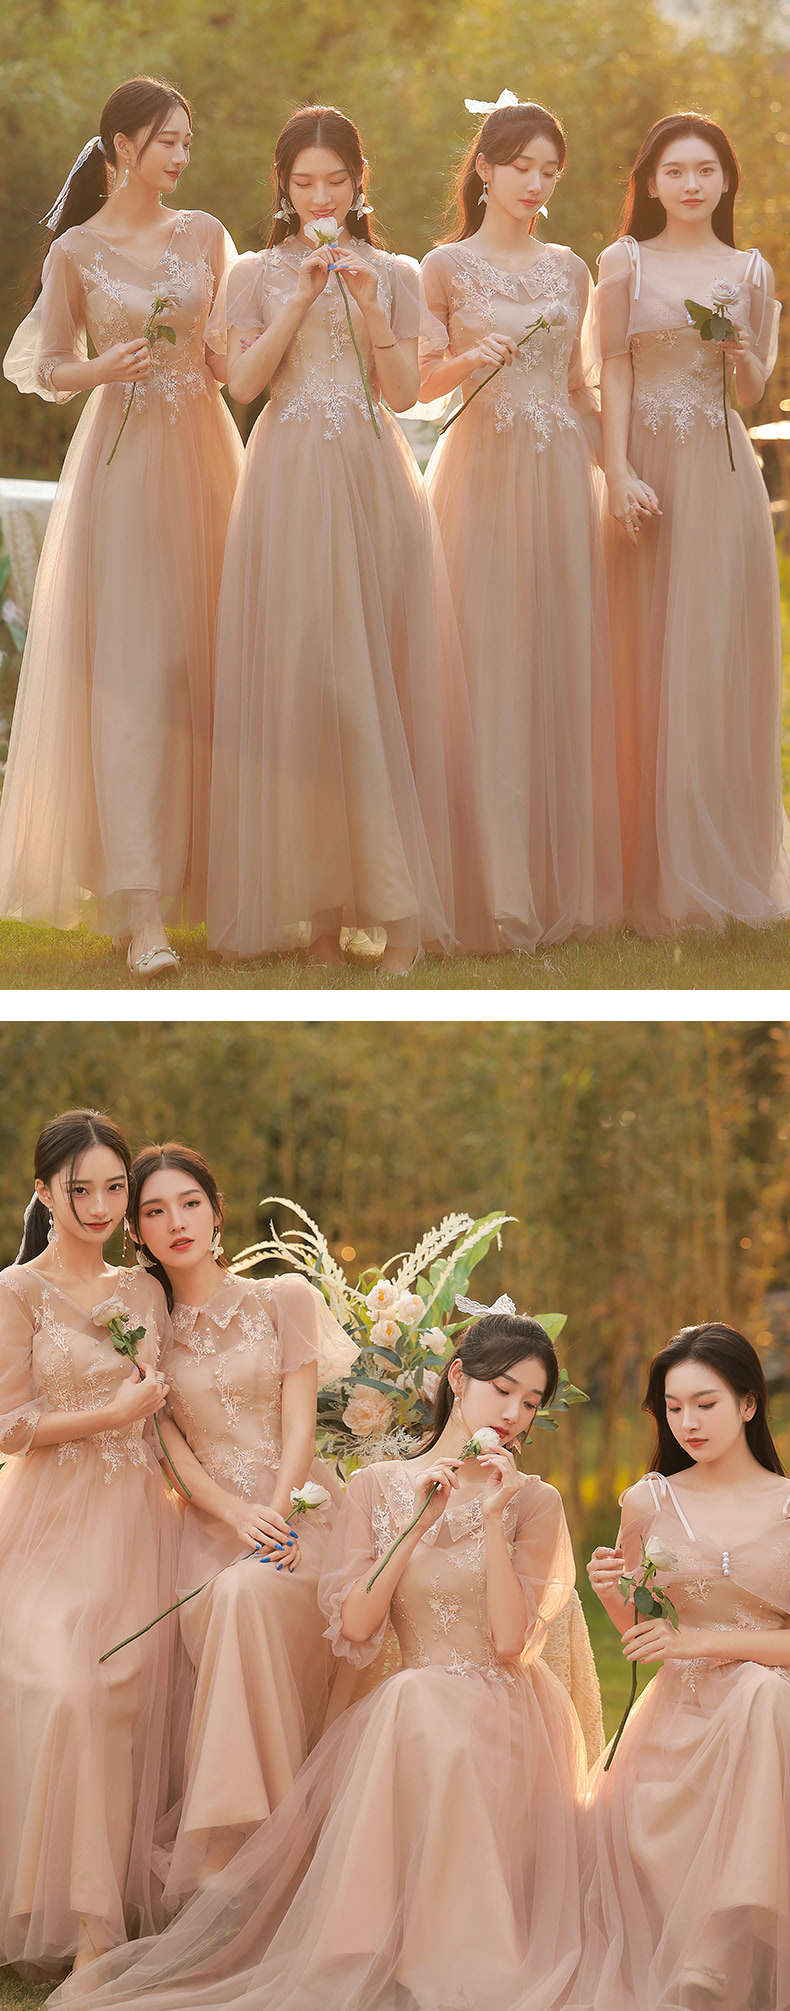 A-Line-Champagne-Wedding-Guest-Bridesmaid-Dress-Casual-Gown12.jpg